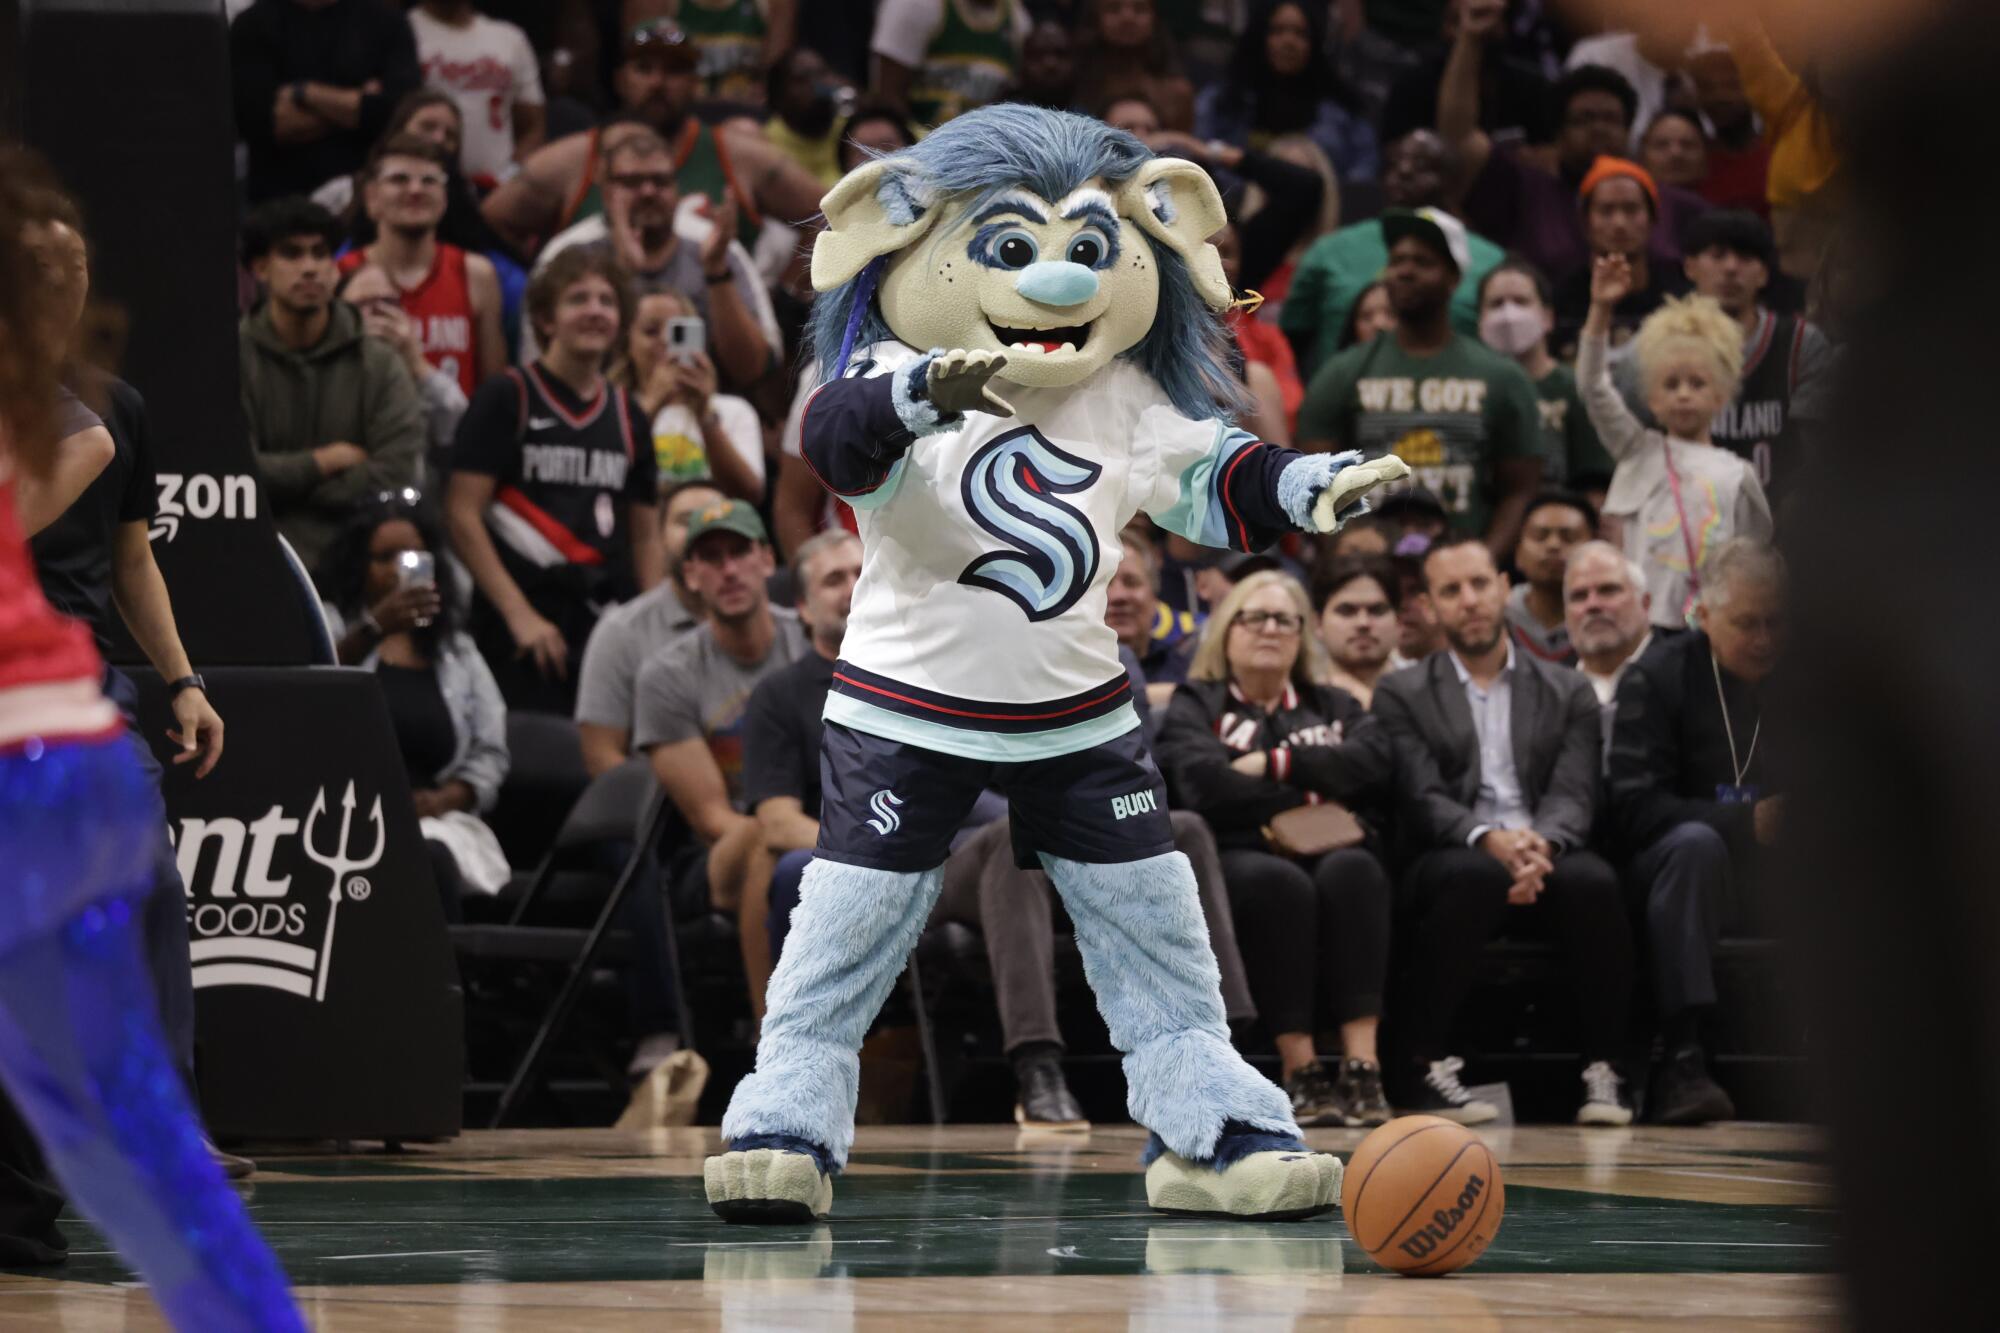 Buoy, the Seattle Kraken mascot, dances on the the basketball court during a timeout of a preseason game.